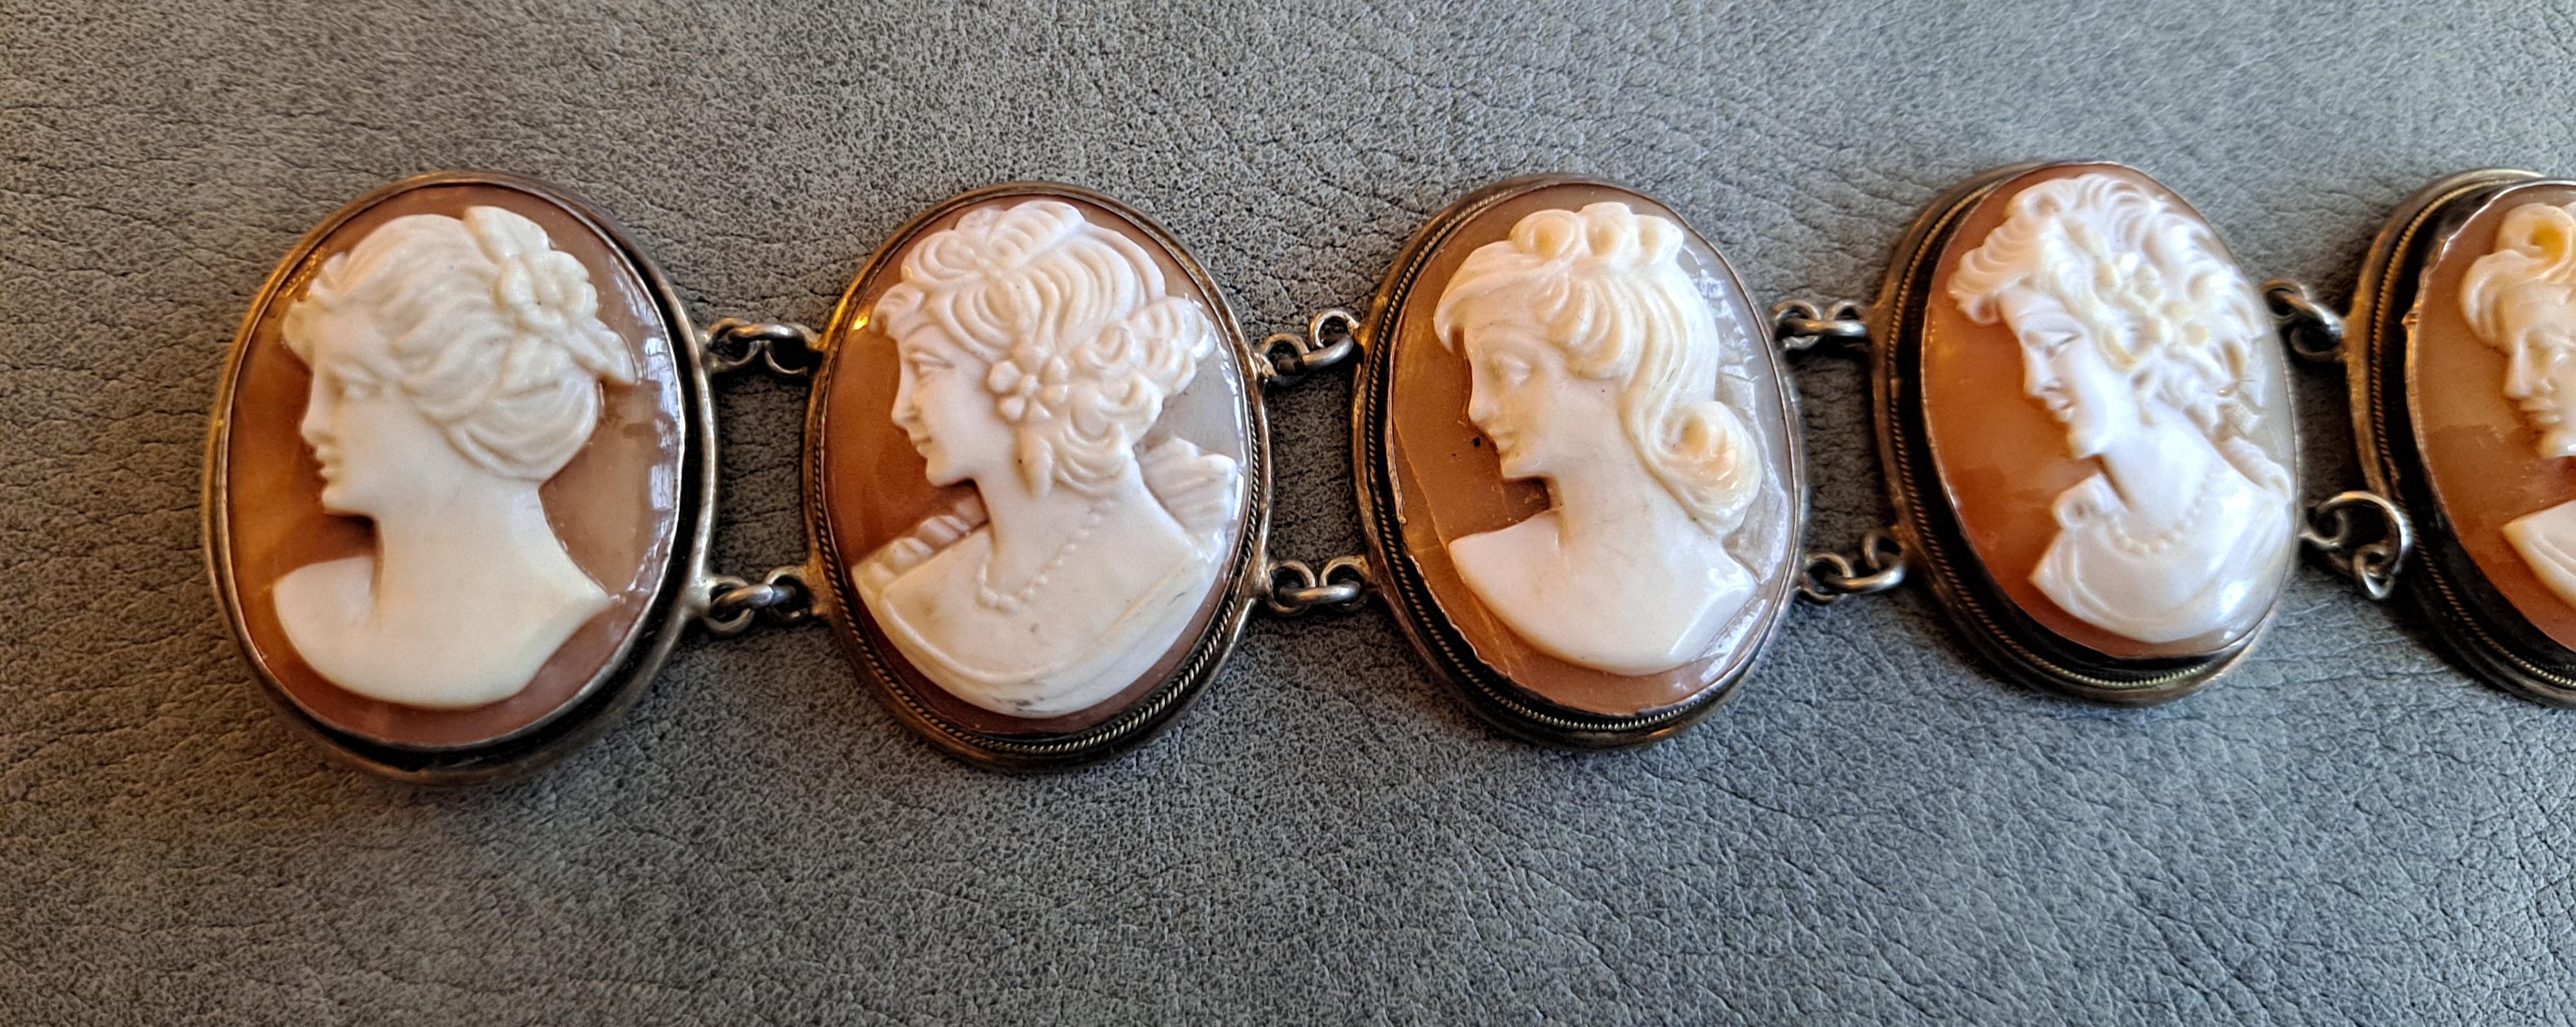 20th Century Victorian Revival Bracelet Set in Sterling Sliver Frames

7  high relief cameos carved from Bull mouth Shell 

Box Clasp 

7.5